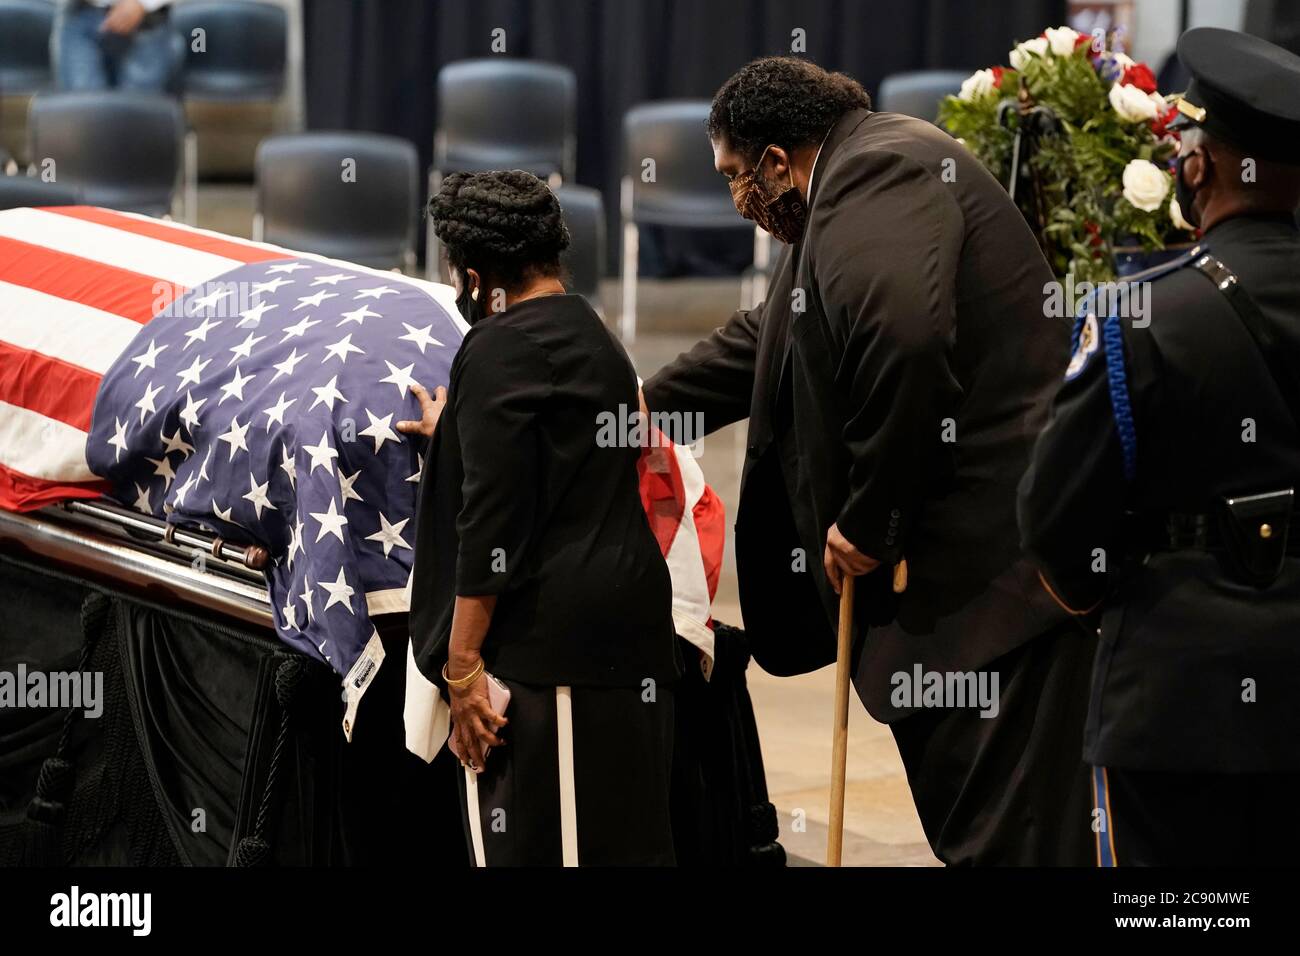 Washington, United States Of America. 27th July, 2020. United States Representative Sheila Jackson Lee (Democrat of Texas), and the Reverend William Barber of Goldsboro, S.C., walk past the flag-draped casket of the late US Representative John Lewis (Democrat of Georgia), as he lies in state at the Capitol in Washington, Monday, July 27, 2020. Credit: J. Scott Applewhite/Pool via CNP | usage worldwide Credit: dpa/Alamy Live News Stock Photo